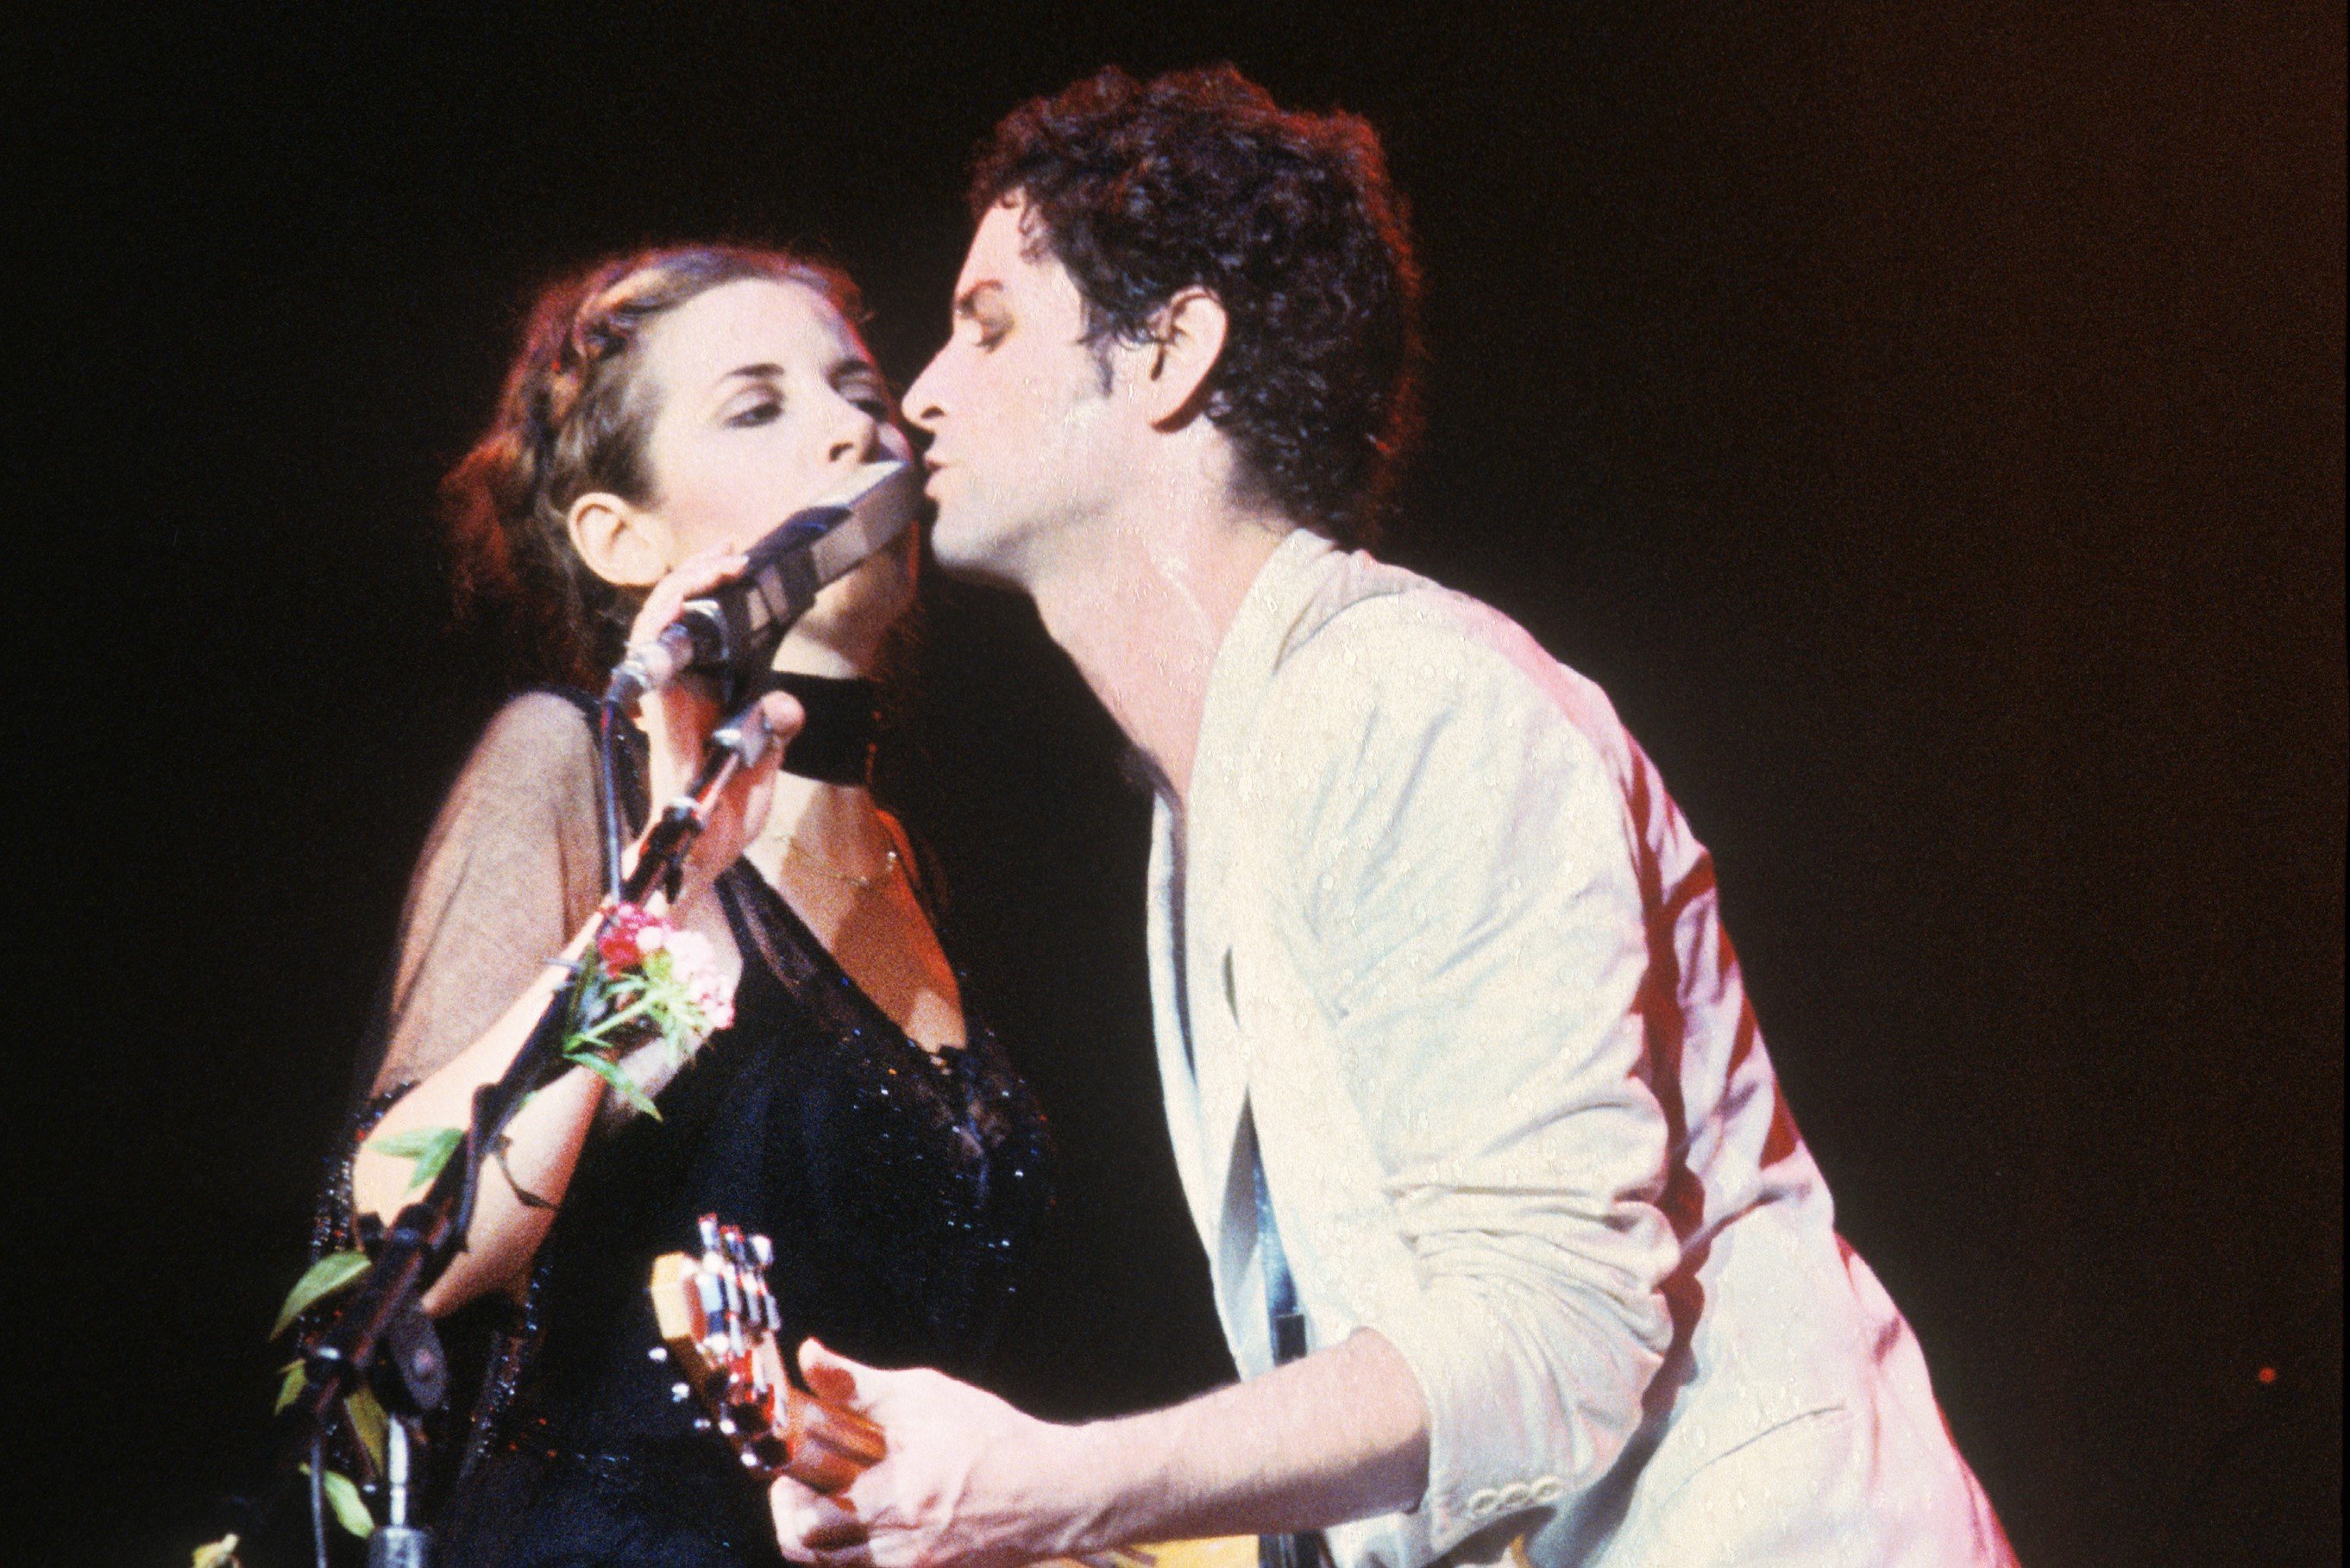 Stevie Nicks wears a black dress and Lindsey Buckingham wears a white suit coat. They sing at the microphone together.